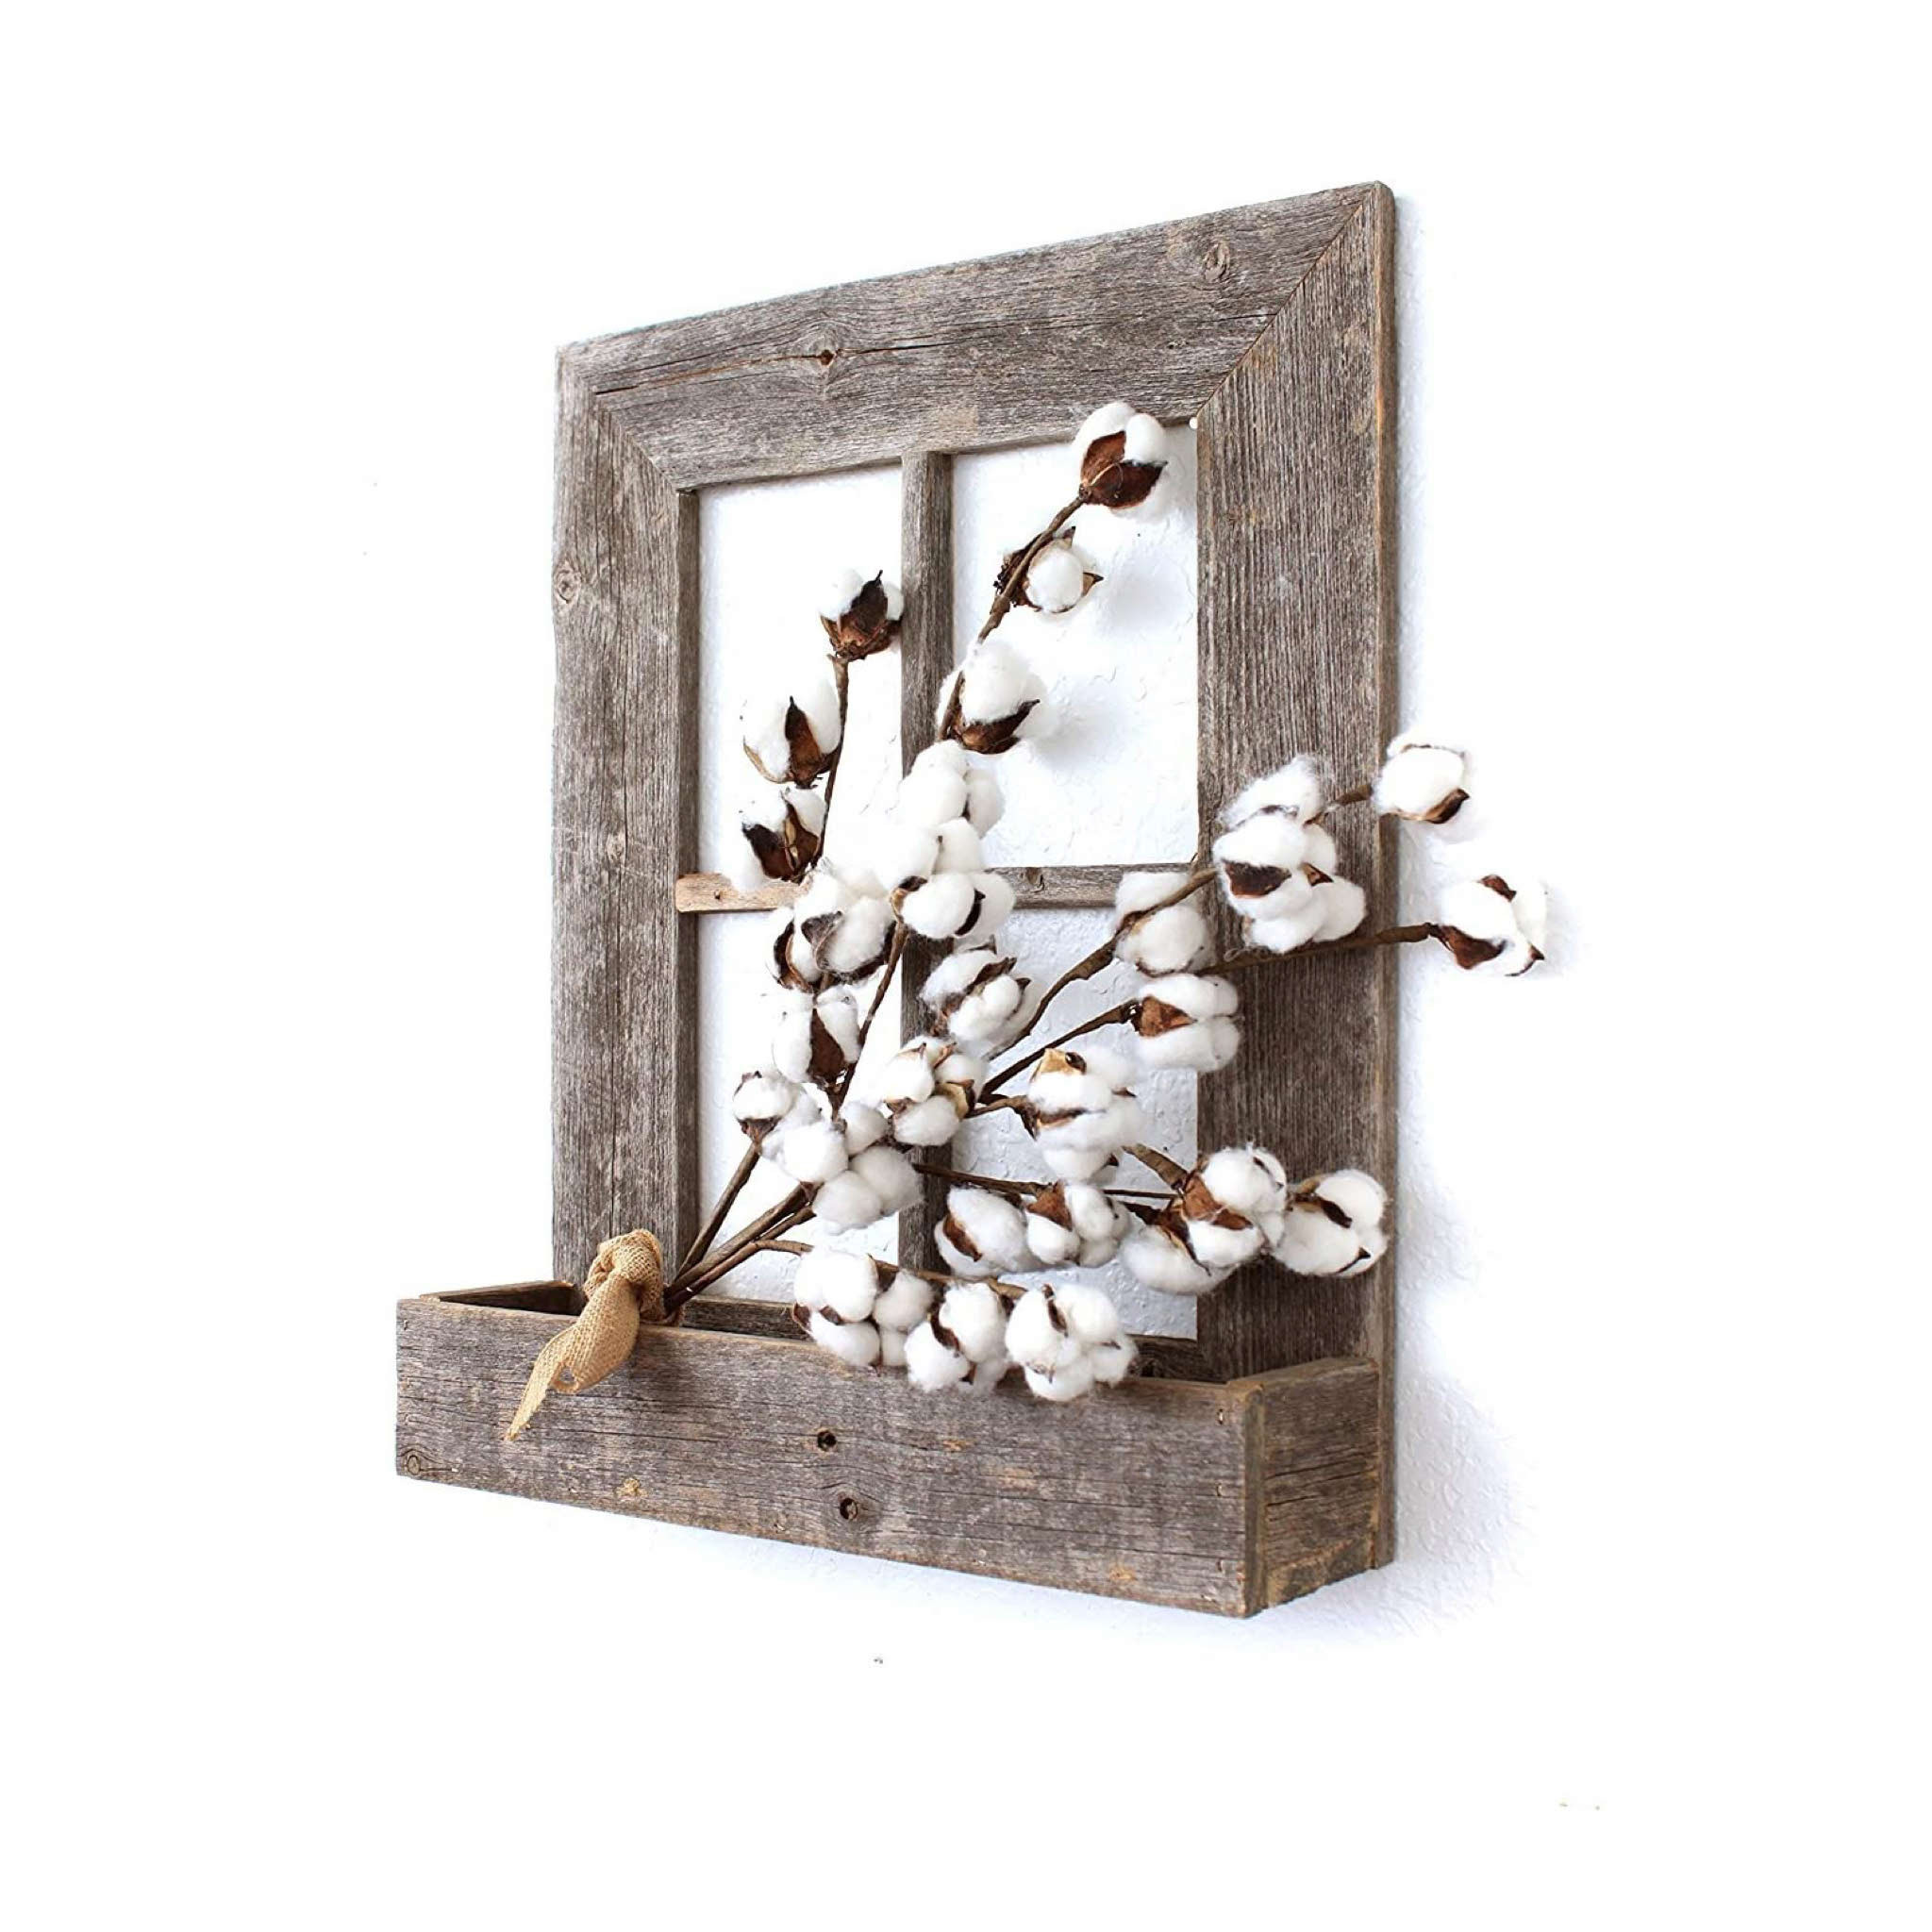 22"x25" Rustic Weatered Grey Picture Frame with Plexiglass Holder